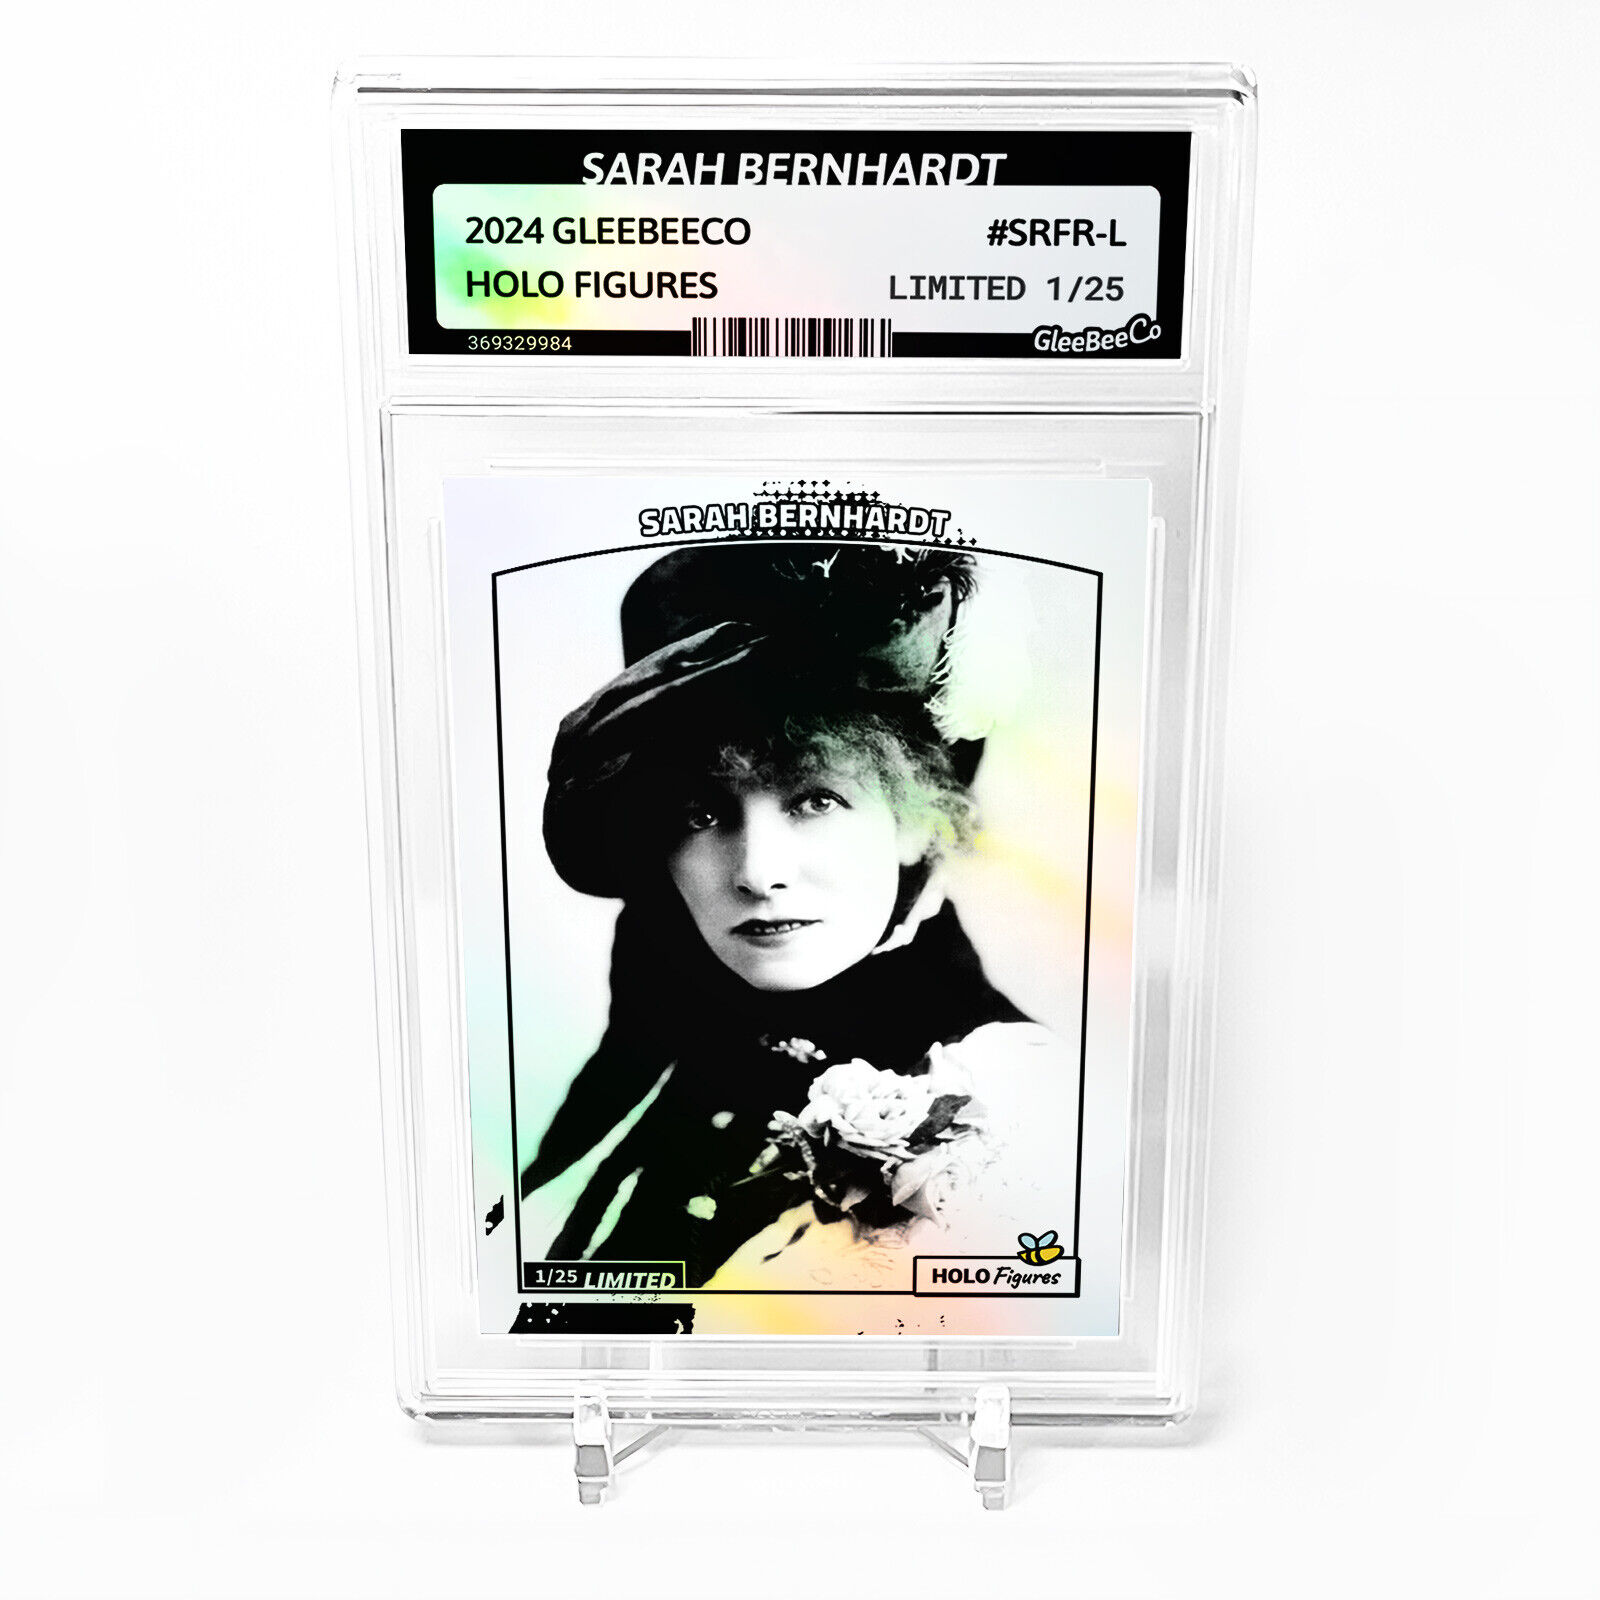 SARAH BERNHARDT French Stage Actress 2024 GleeBeeCo Holo Card #SRFR-L /25